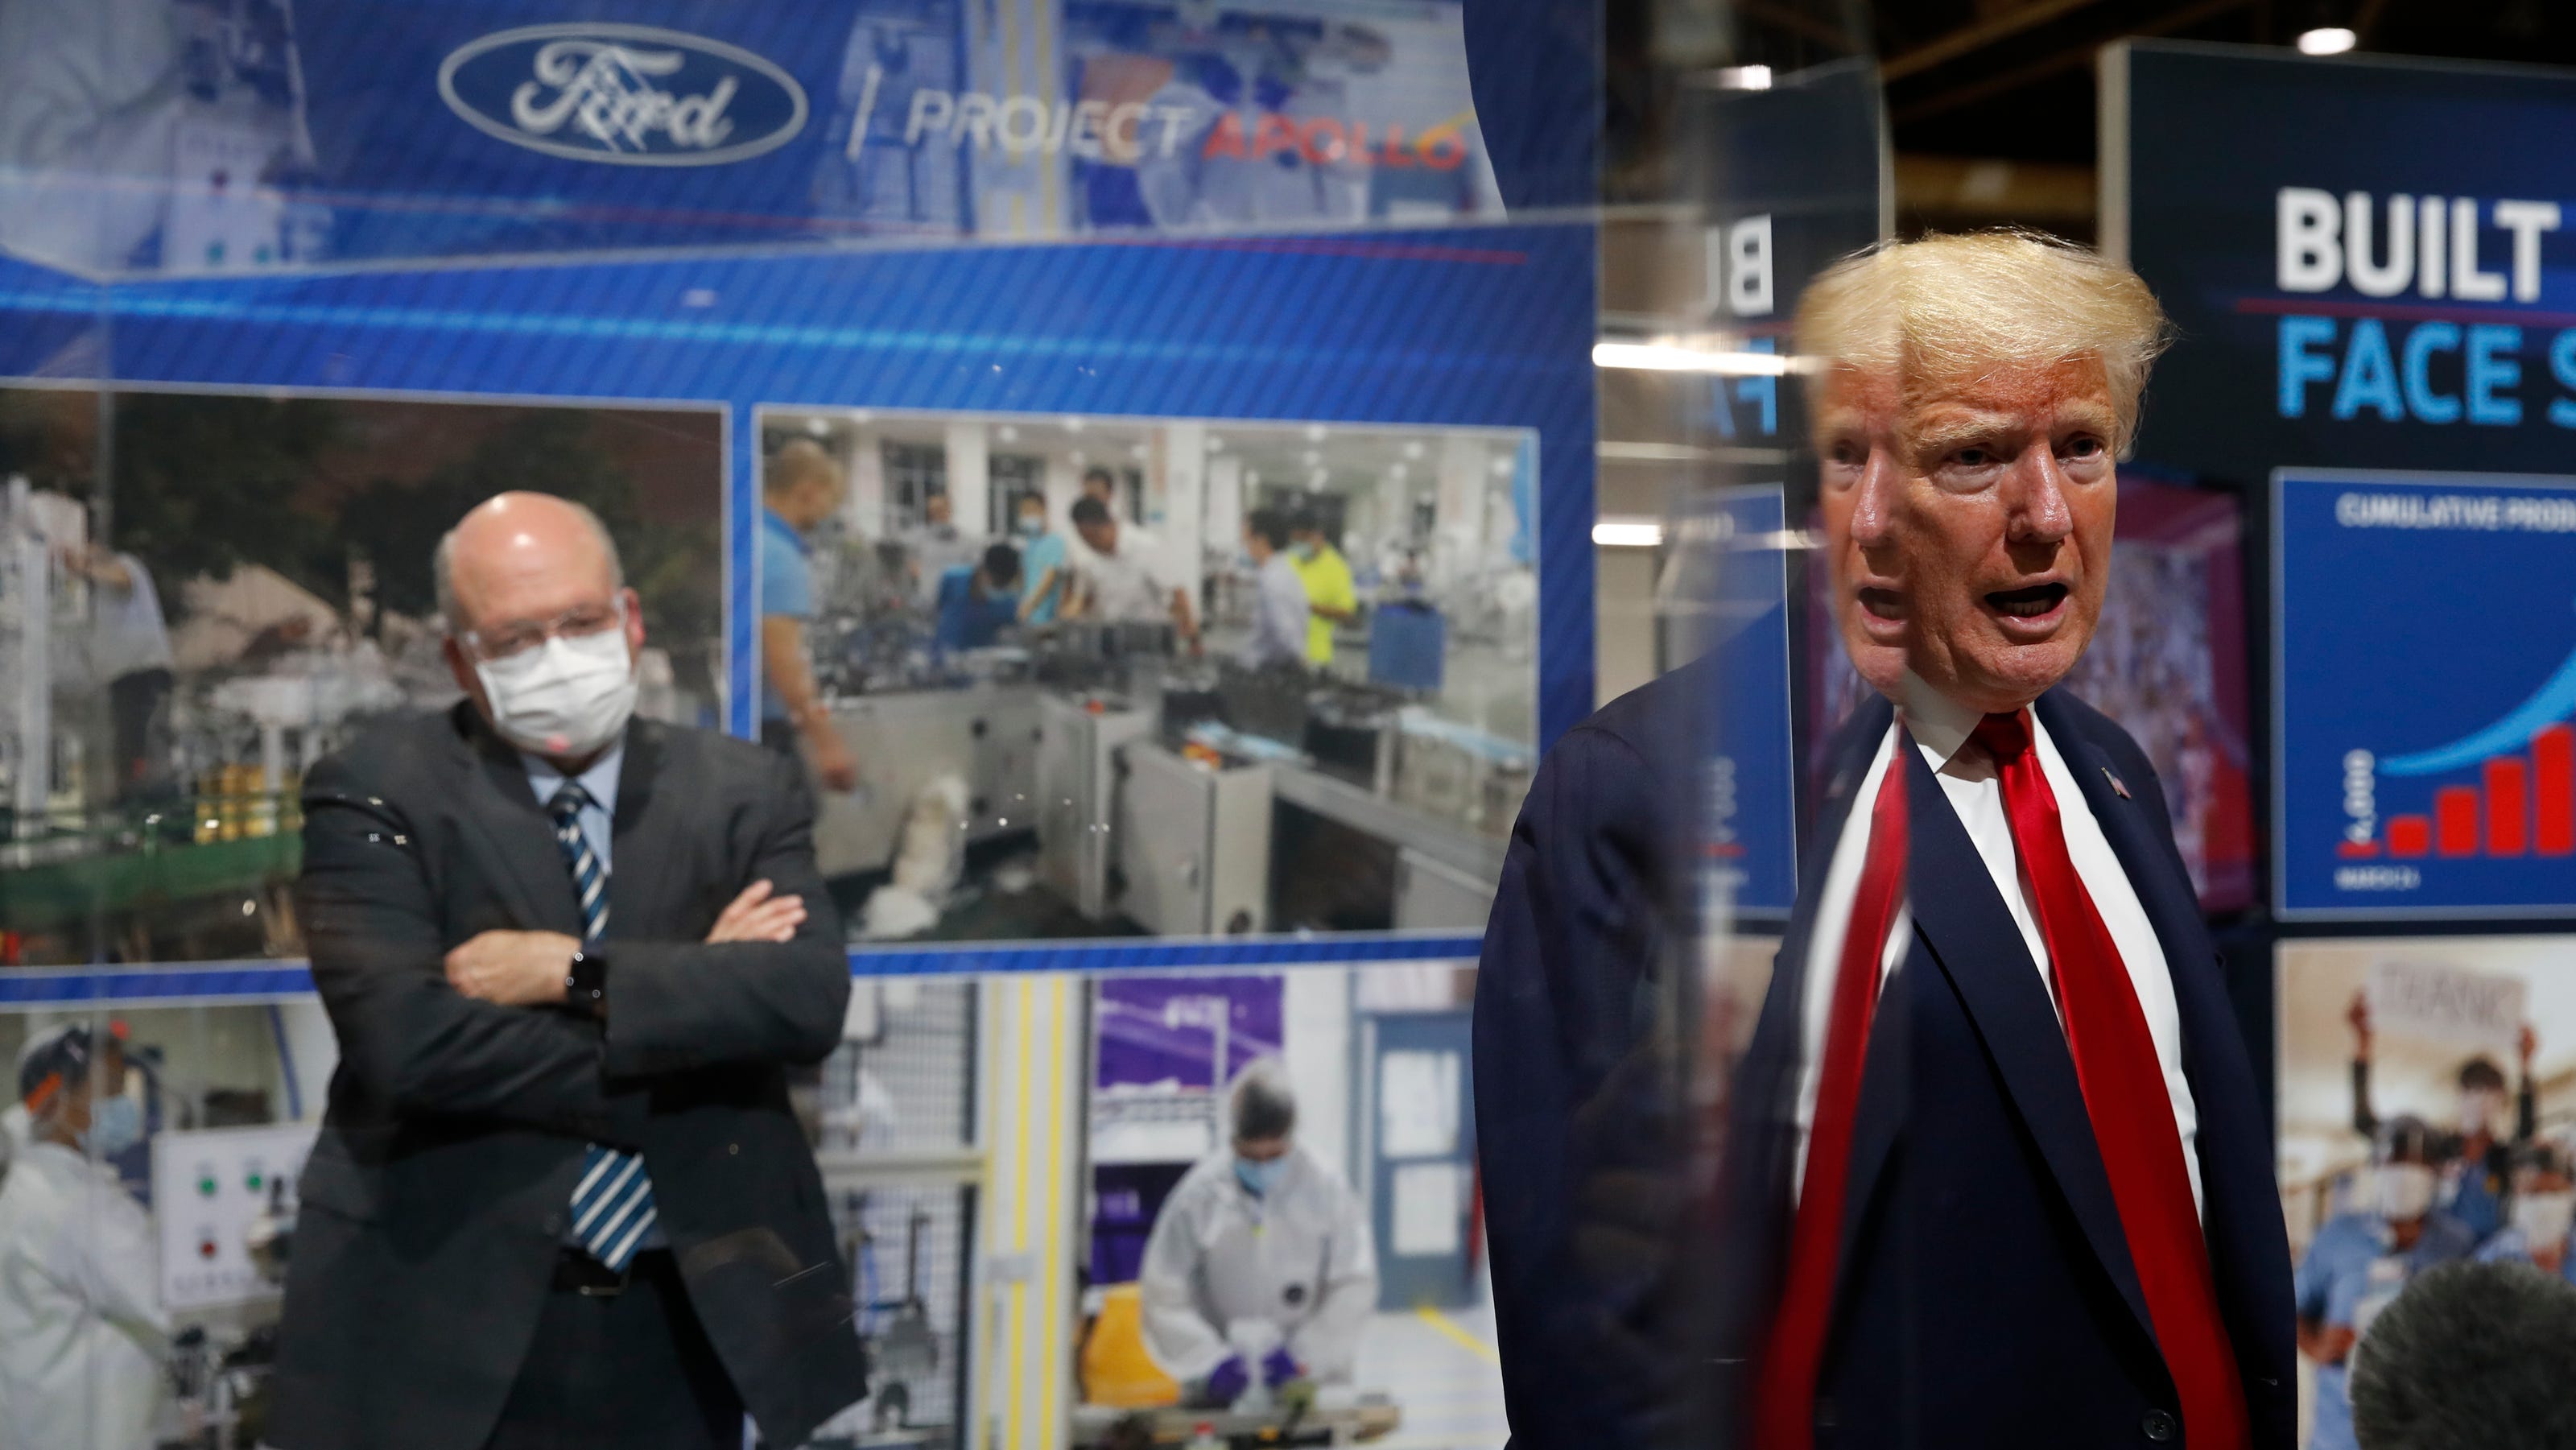 Trump criticized for praising bloodlines of Henry Ford, an anti-Semite